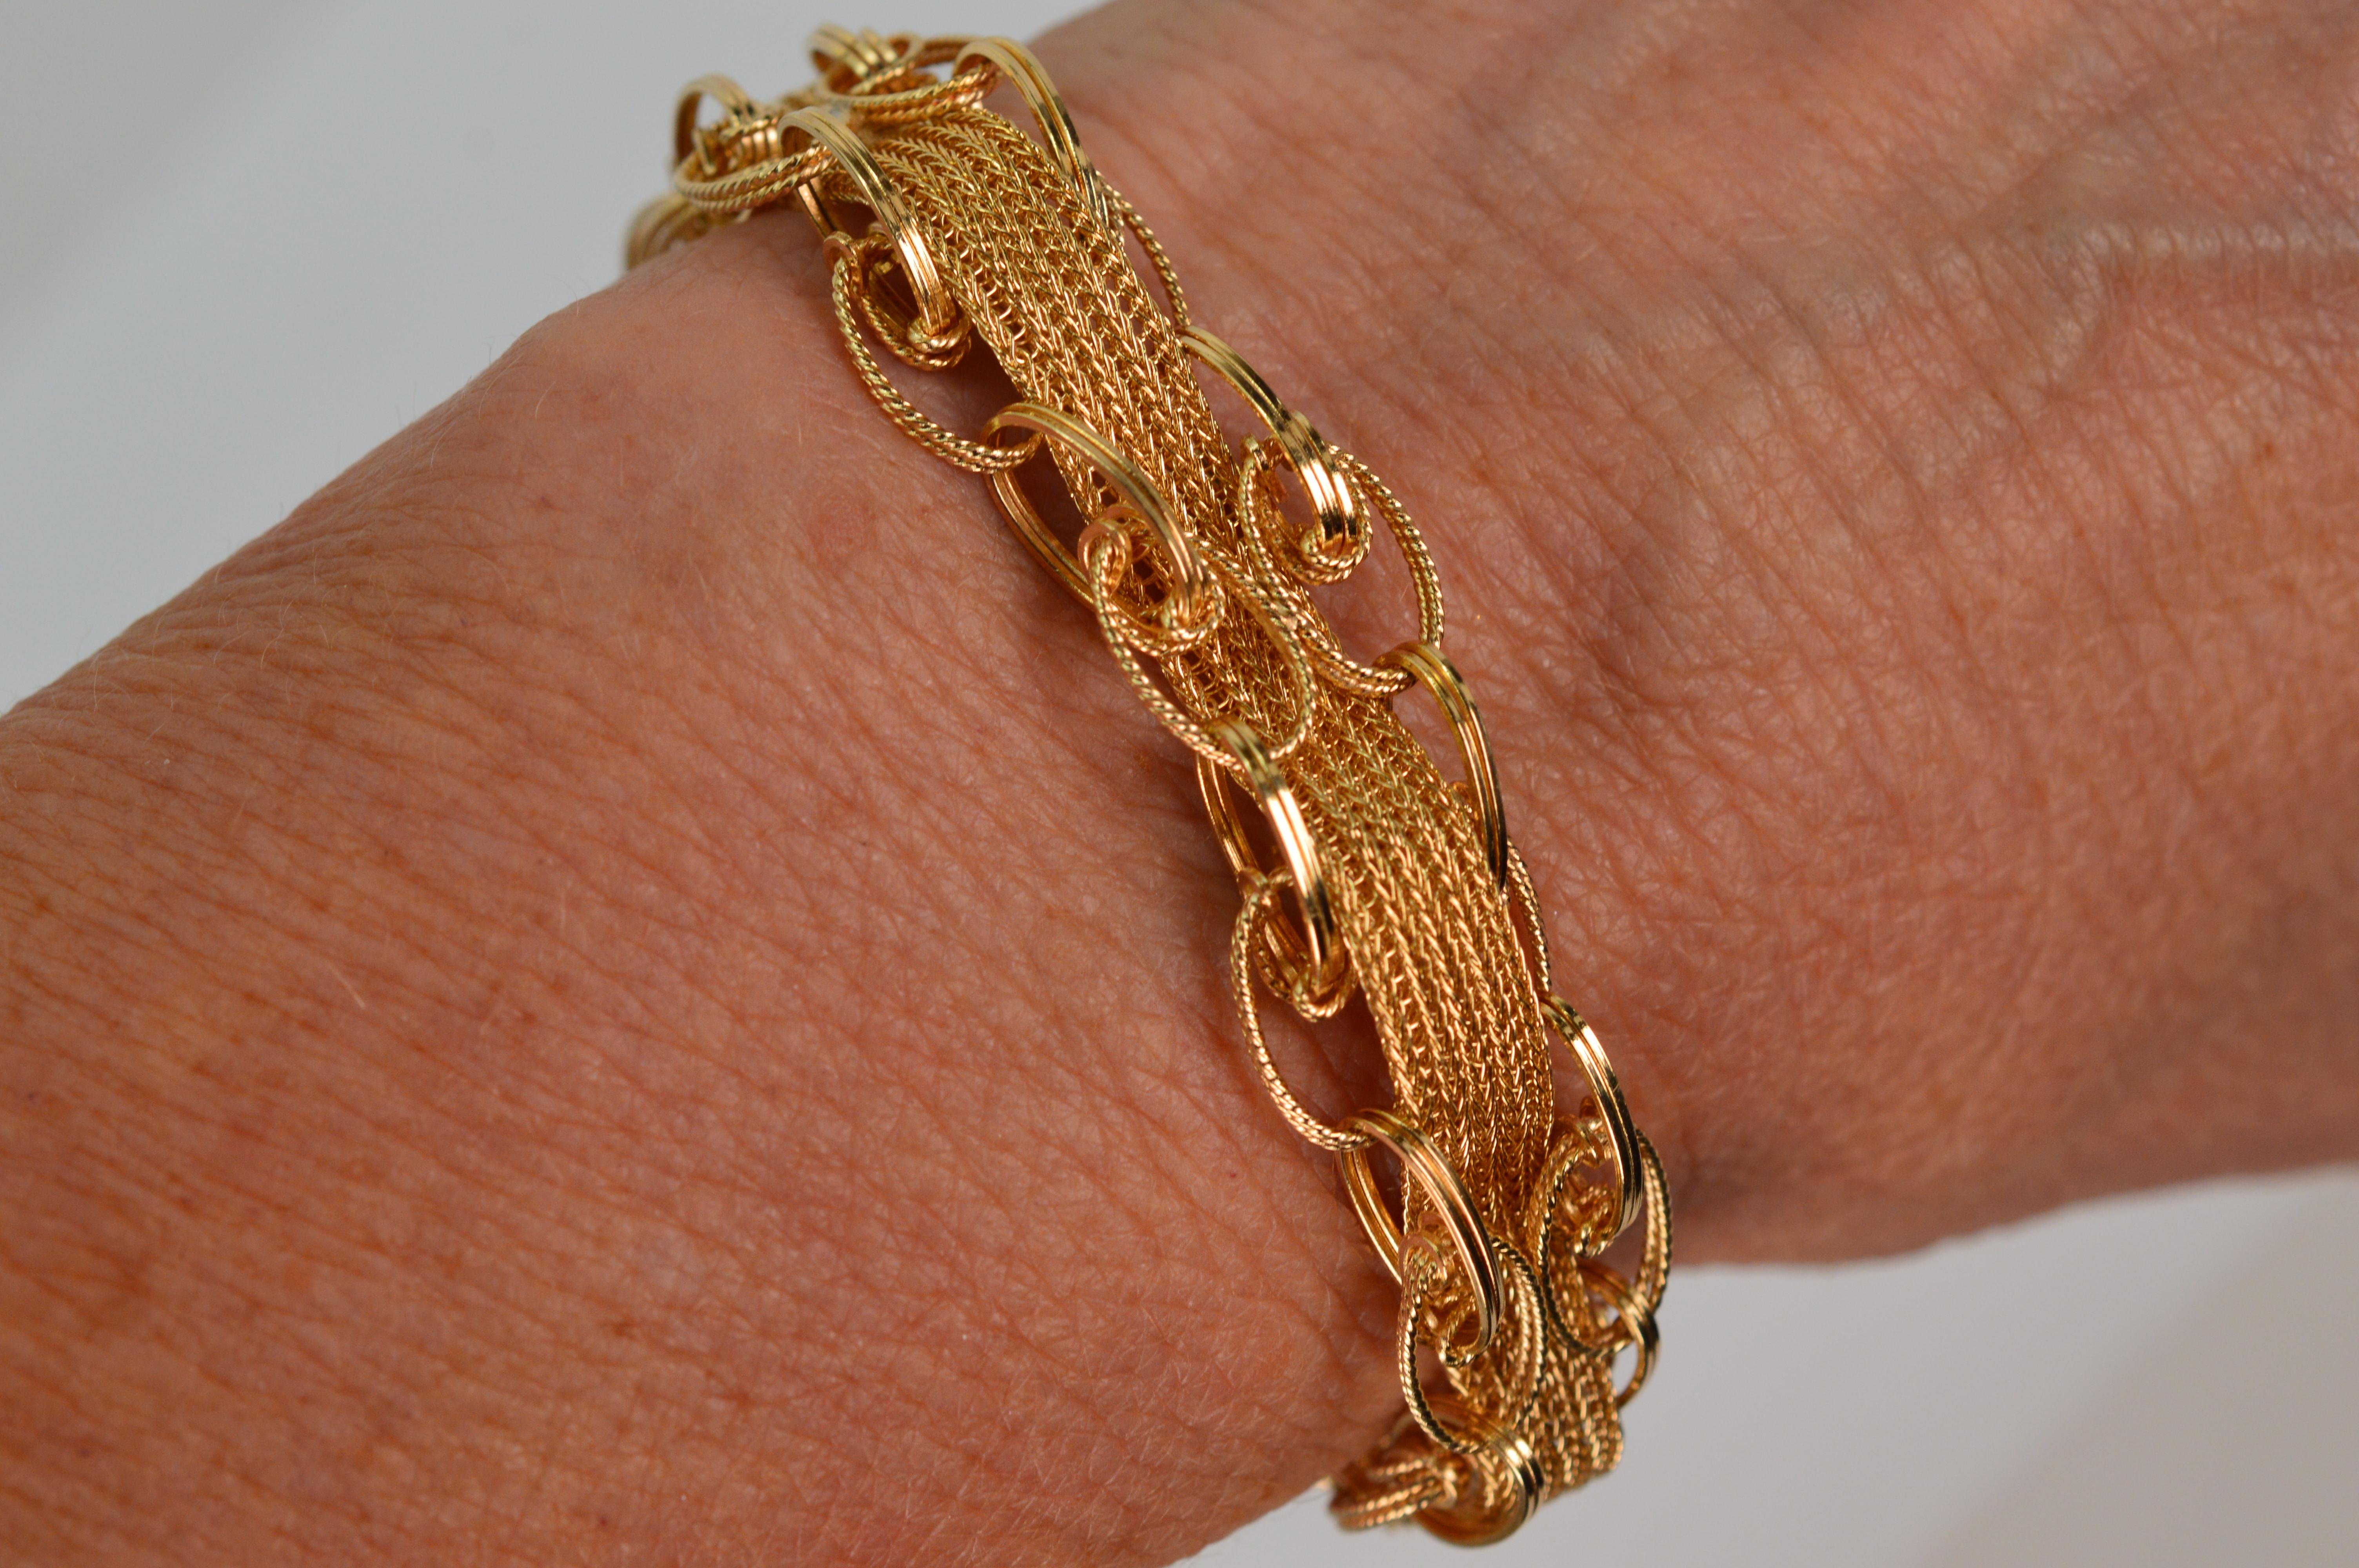 The splendor of shapes paired with textures create this alluring bracelet crafted in 14 karat yellow gold.  A four ply ribbon of 14 karat gold mesh chain with a pleasing textured finish is the foundation of this fine piece and is interwoven through